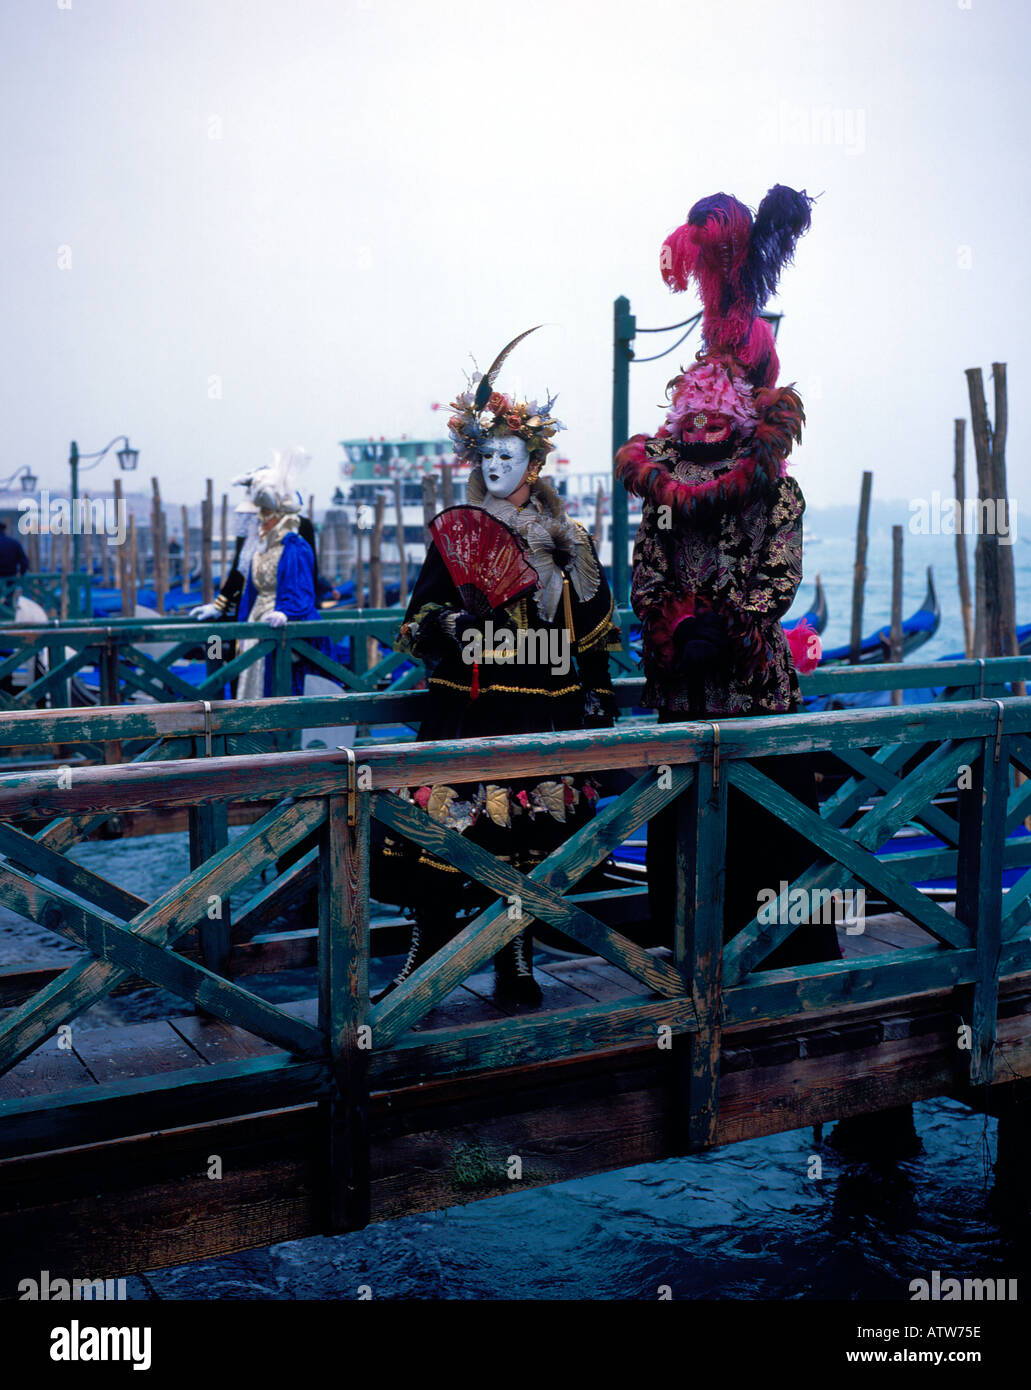 Carnival At Venice Italy, UNESCO World Heritage Site, Europe. Photo by Willy Matheisl Stock Photo